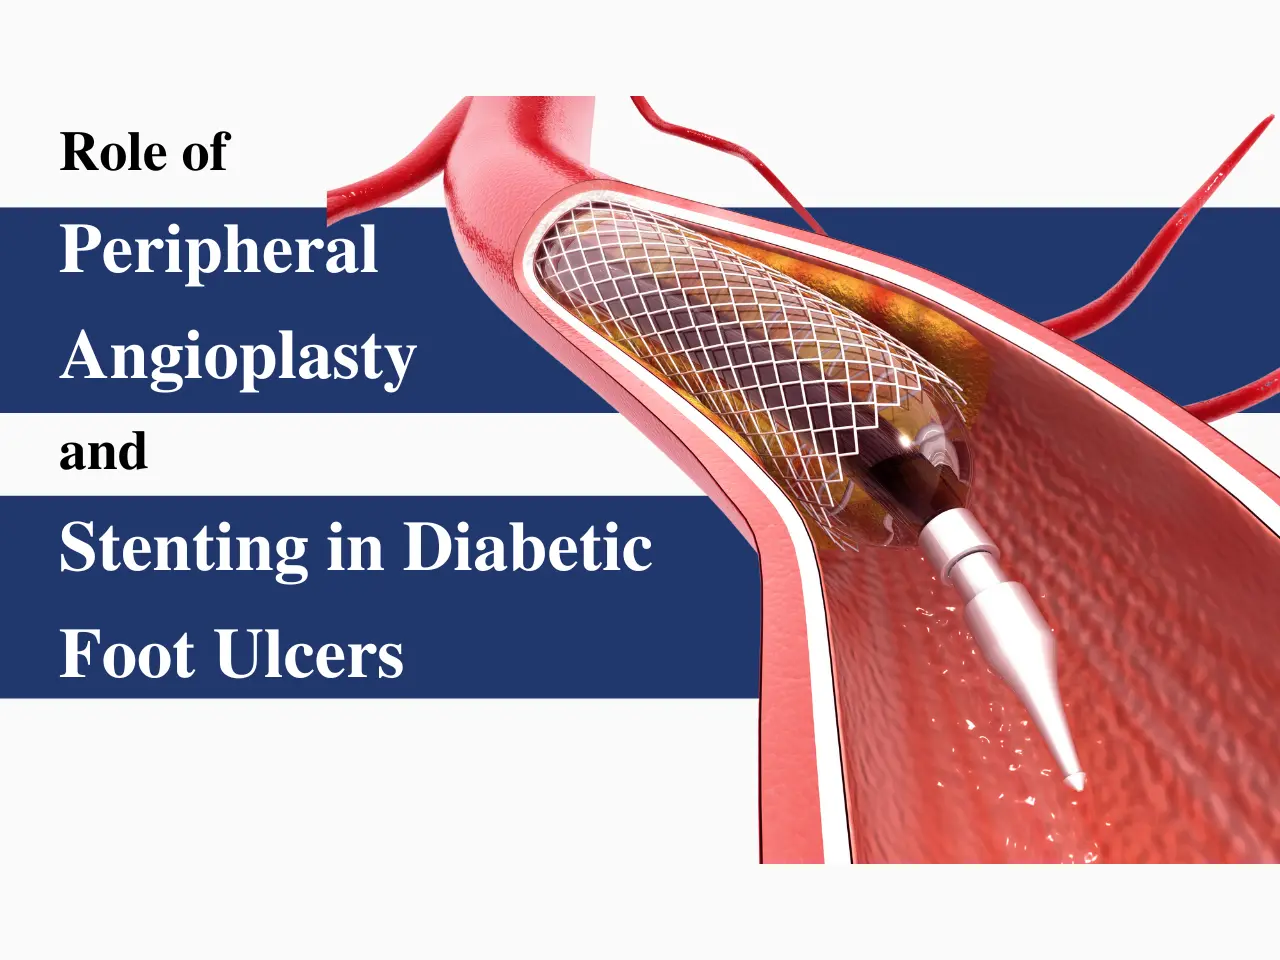 Role of Peripheral Angioplasty and Stenting in Diabetic Foot Ulcers